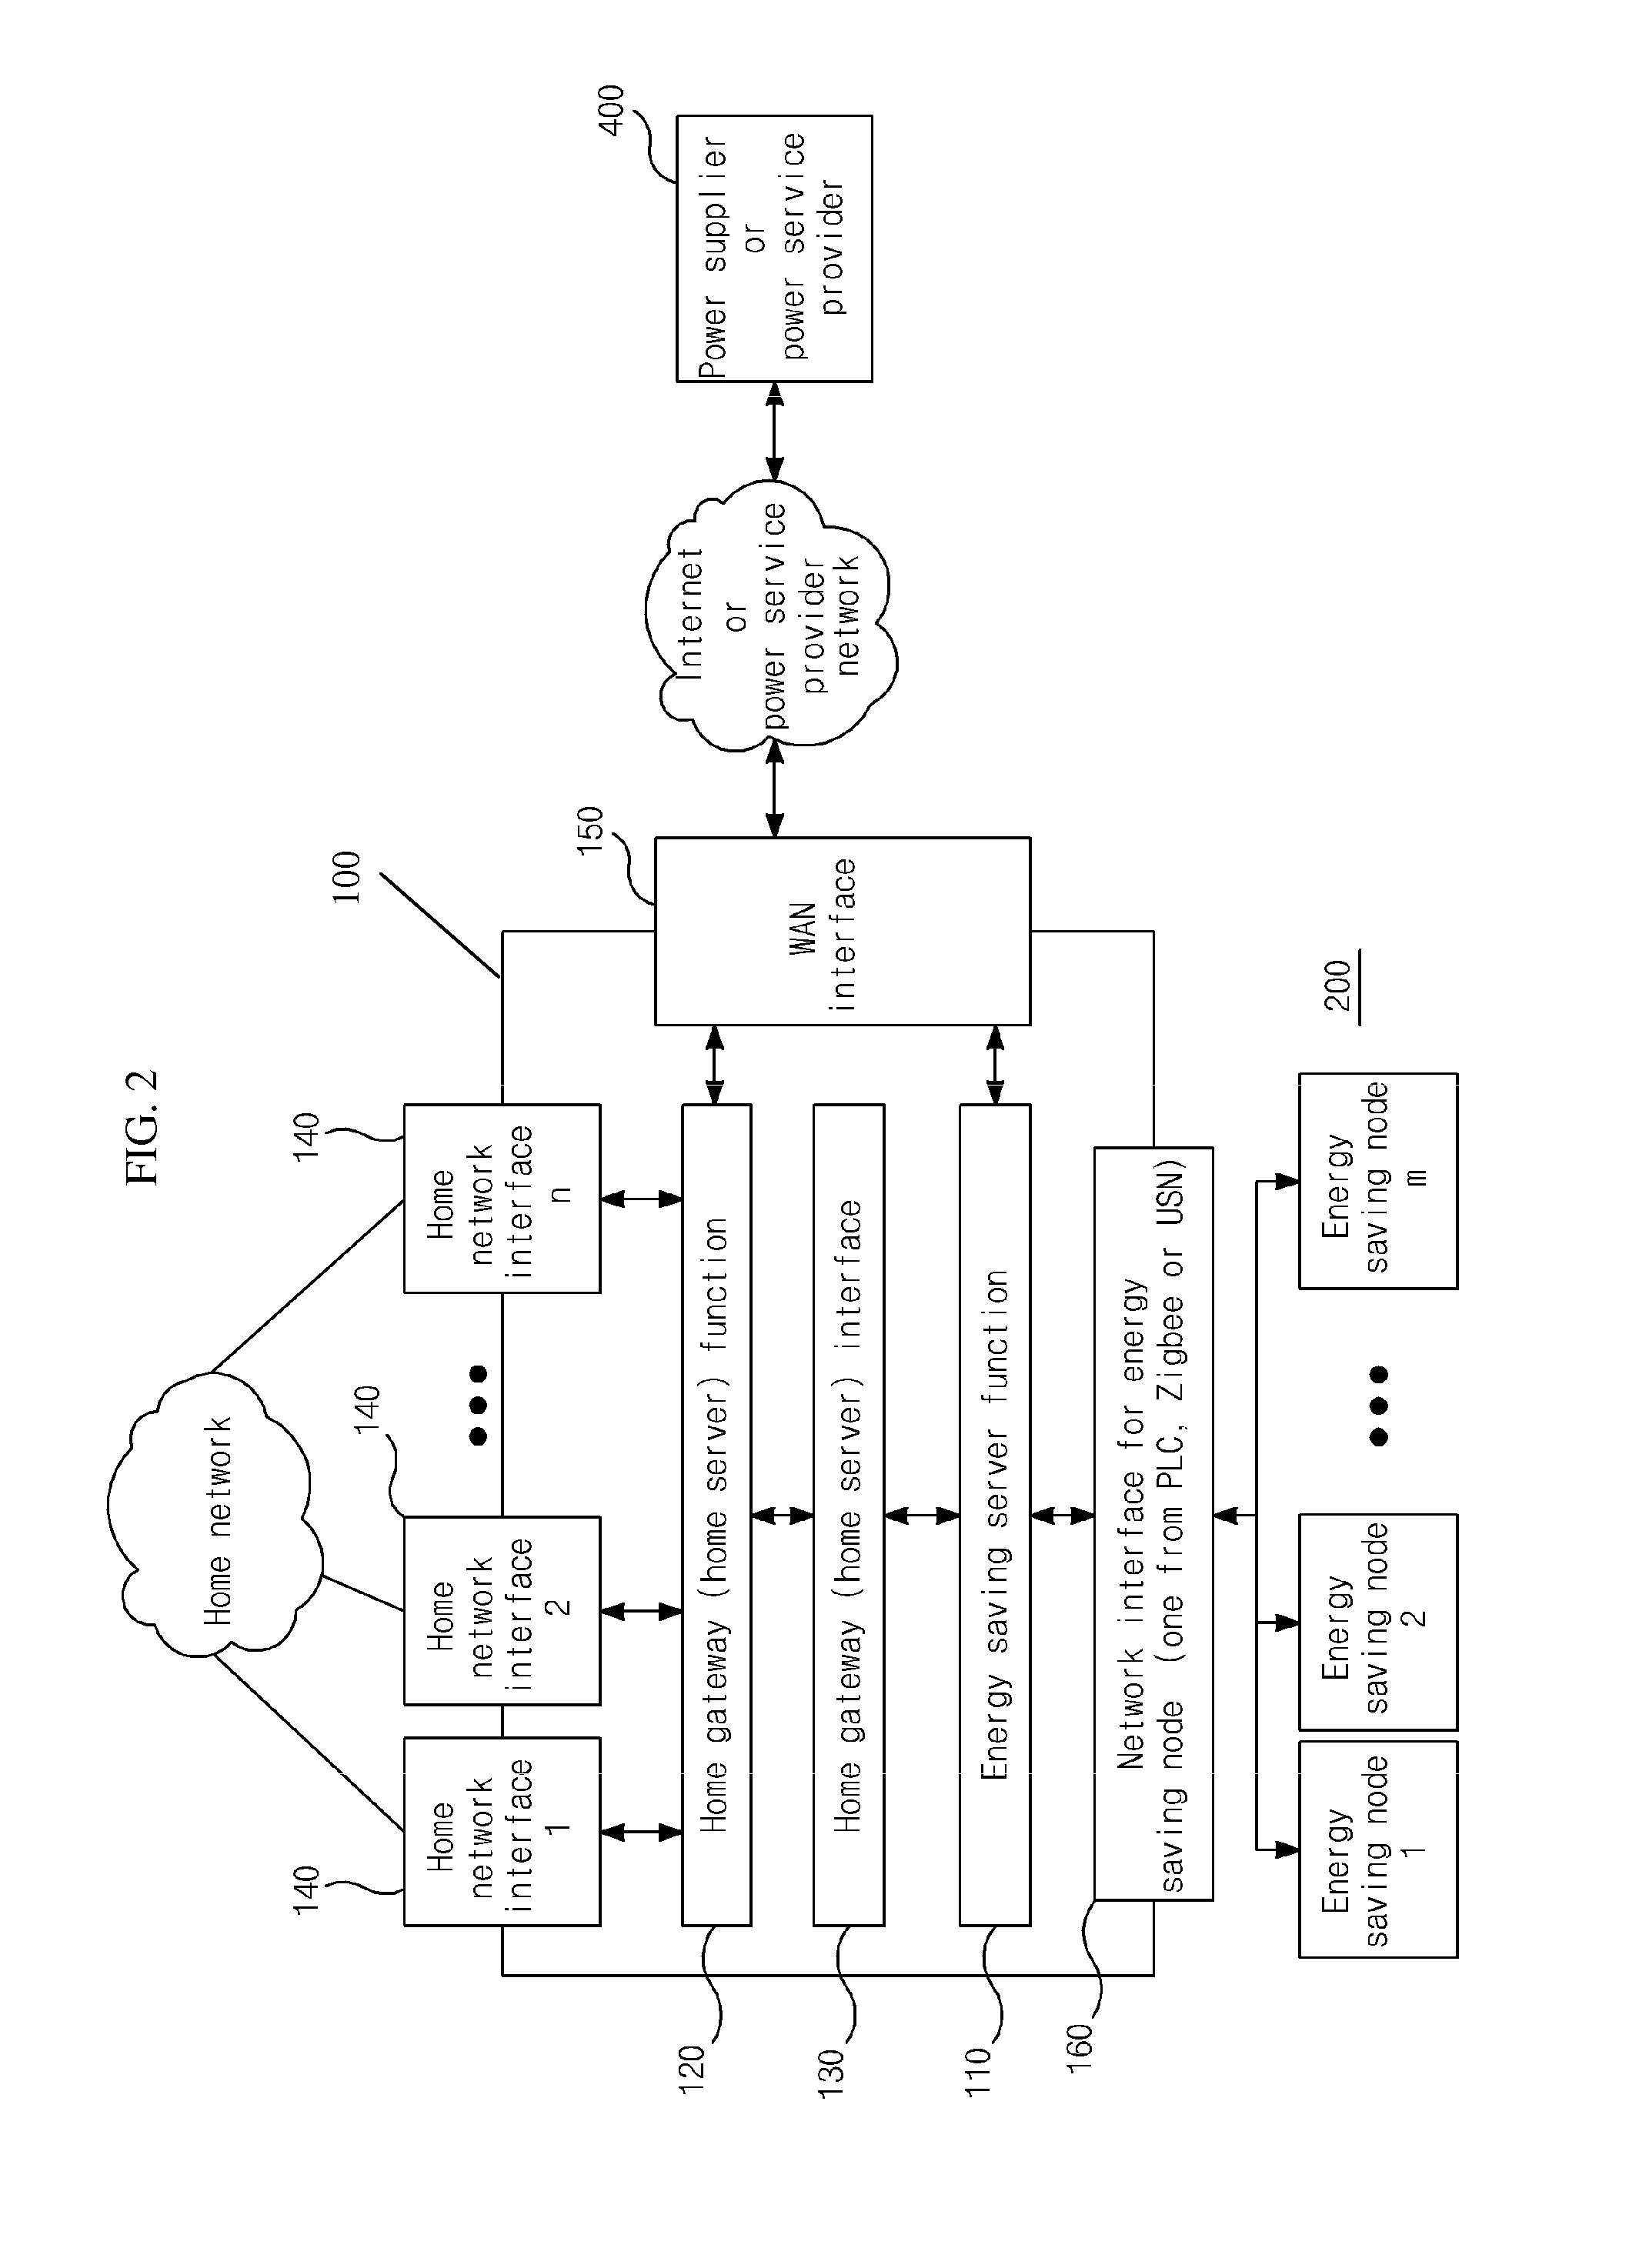 System and methods for monitoring energy consumption and reducing standby power